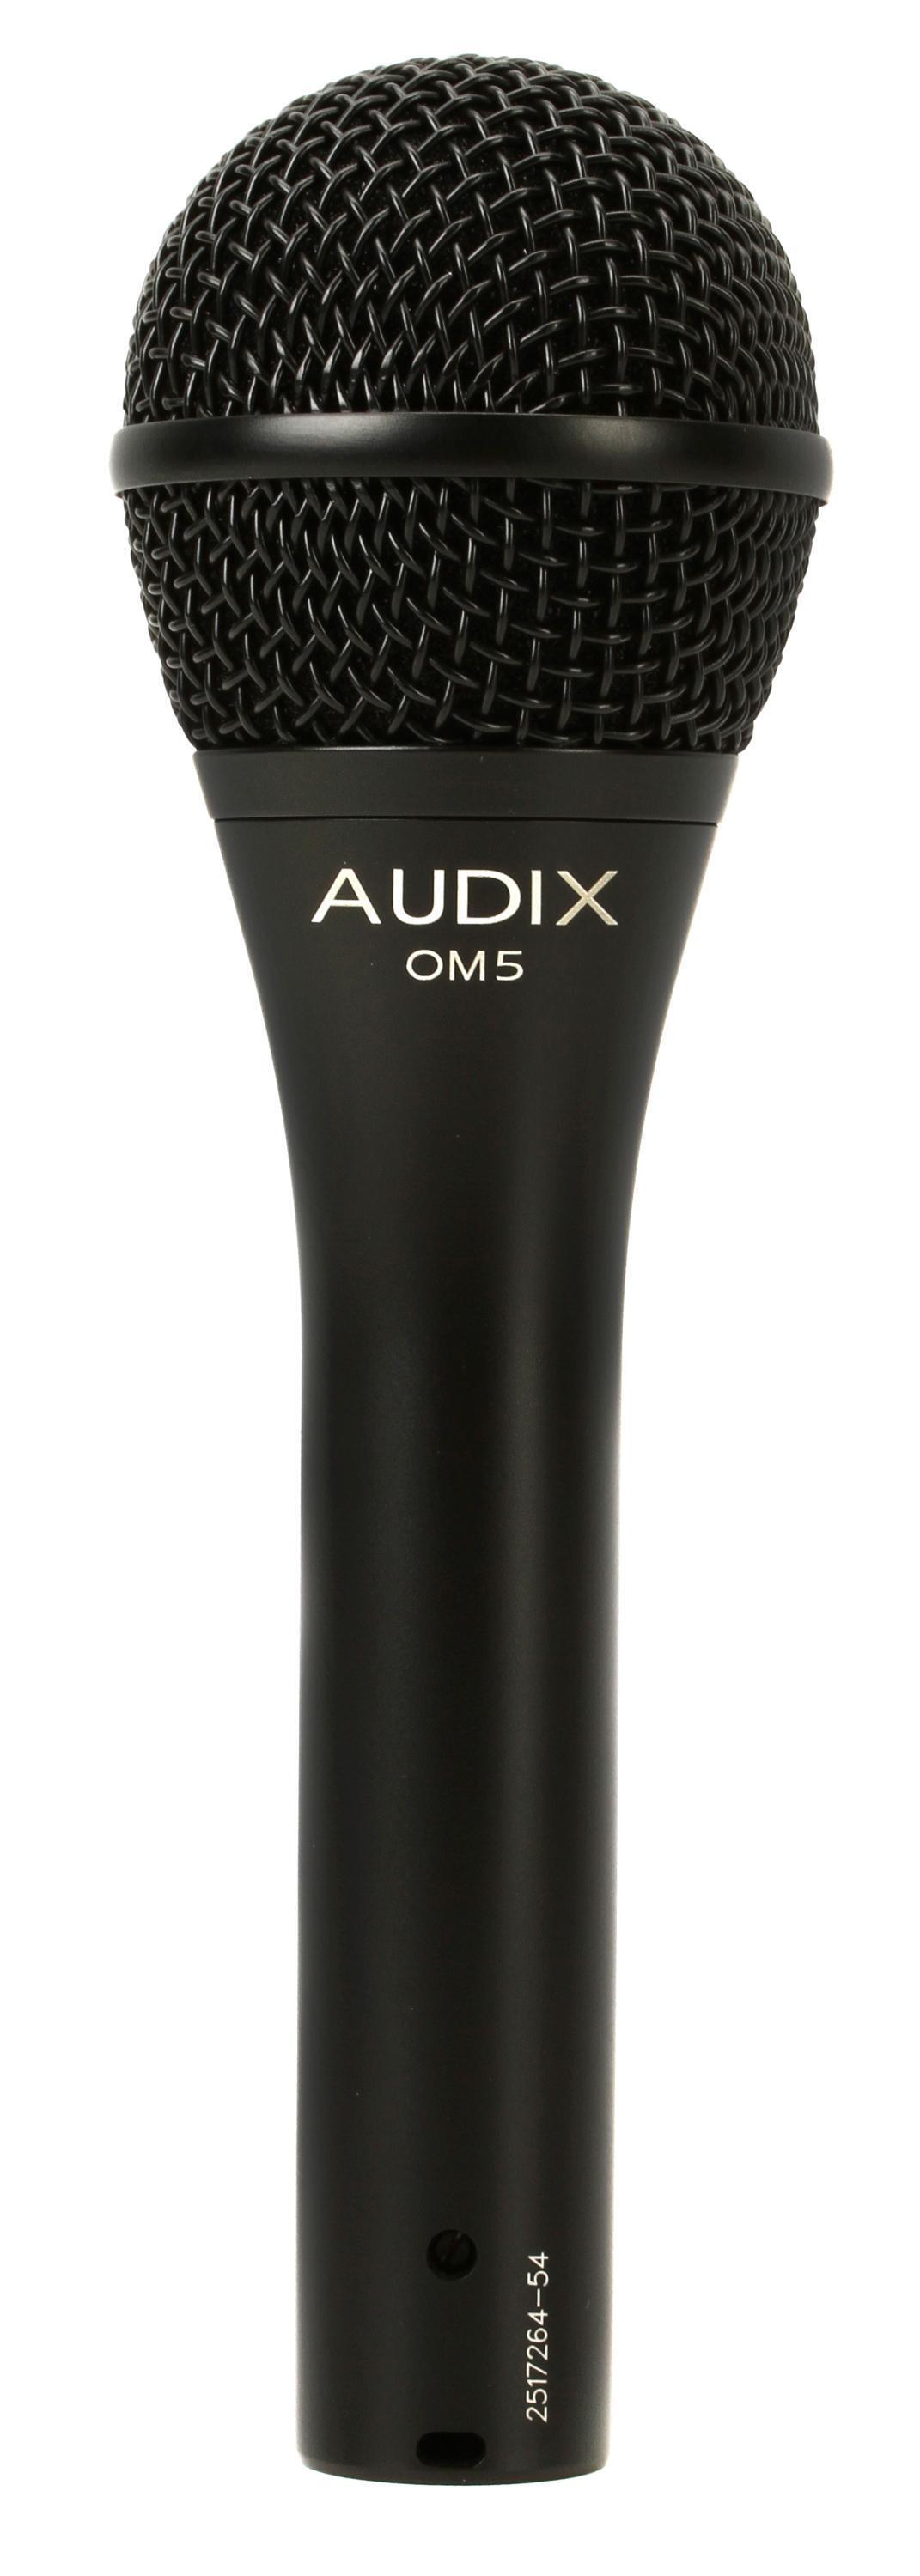 Audix OM5 Hypercardioid Dynamic Vocal Microphone | Sweetwater